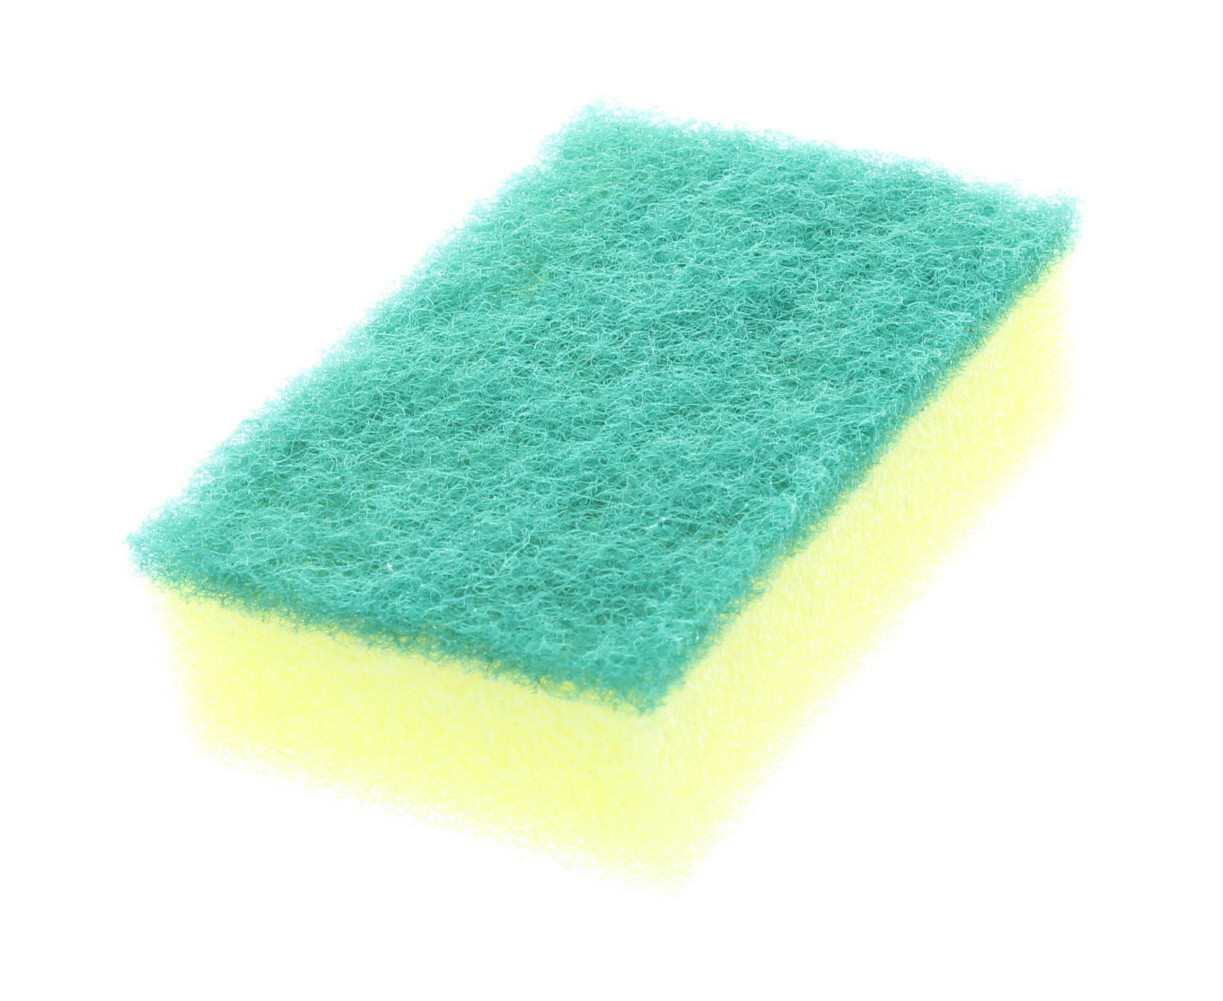 Green And Yellow Soft Scrub Sponge, For Cleaning at Rs 60/dozen in